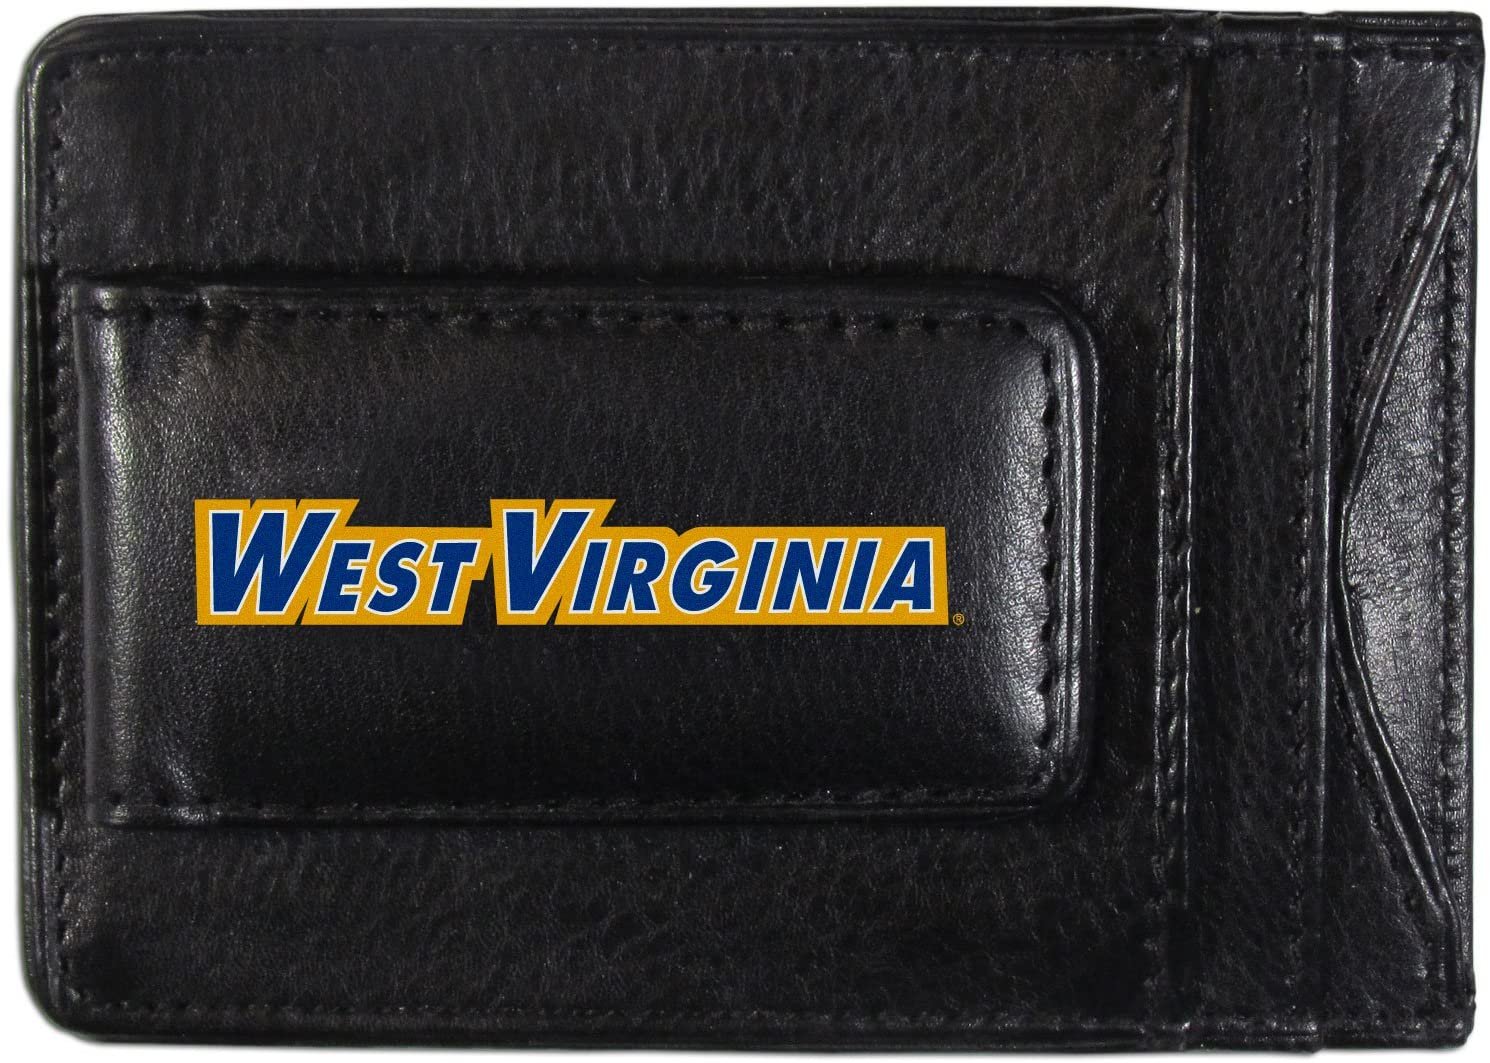 West Virginia University Mountaineers Black Leather Wallet, Front Pocket Magnetic Money Clip, Printed Logo